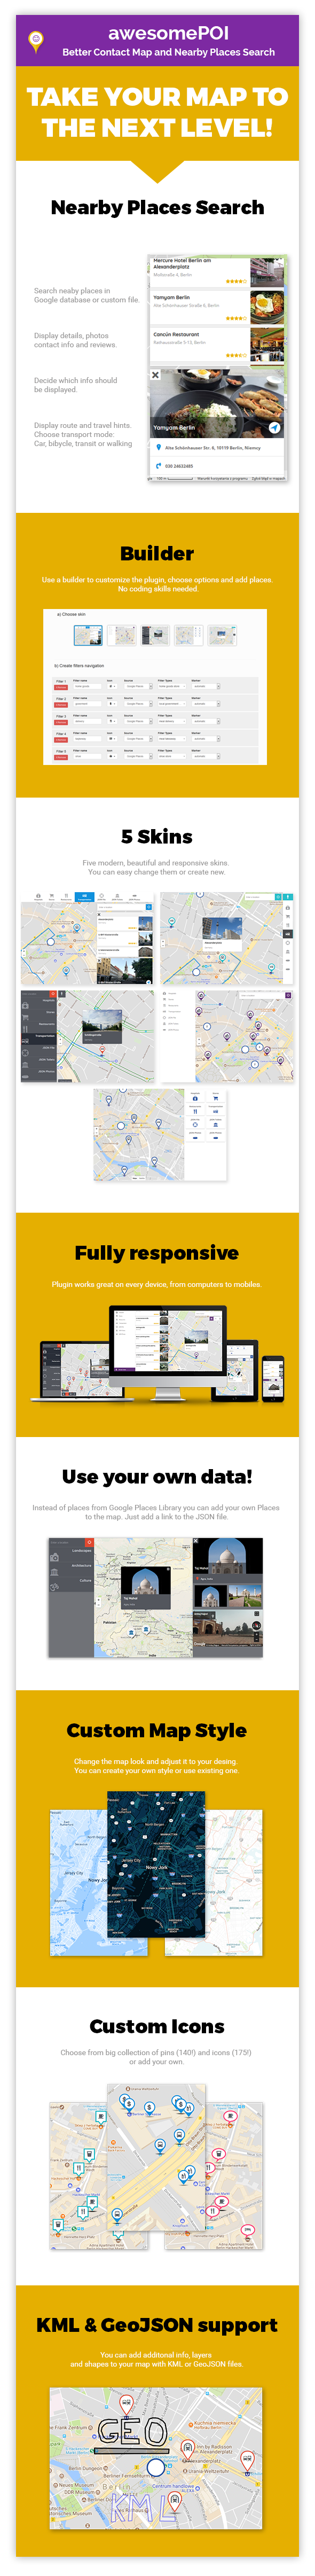 awesomePOI - Better Contact Map and Nearby Places Search jQuery Plugin - 2